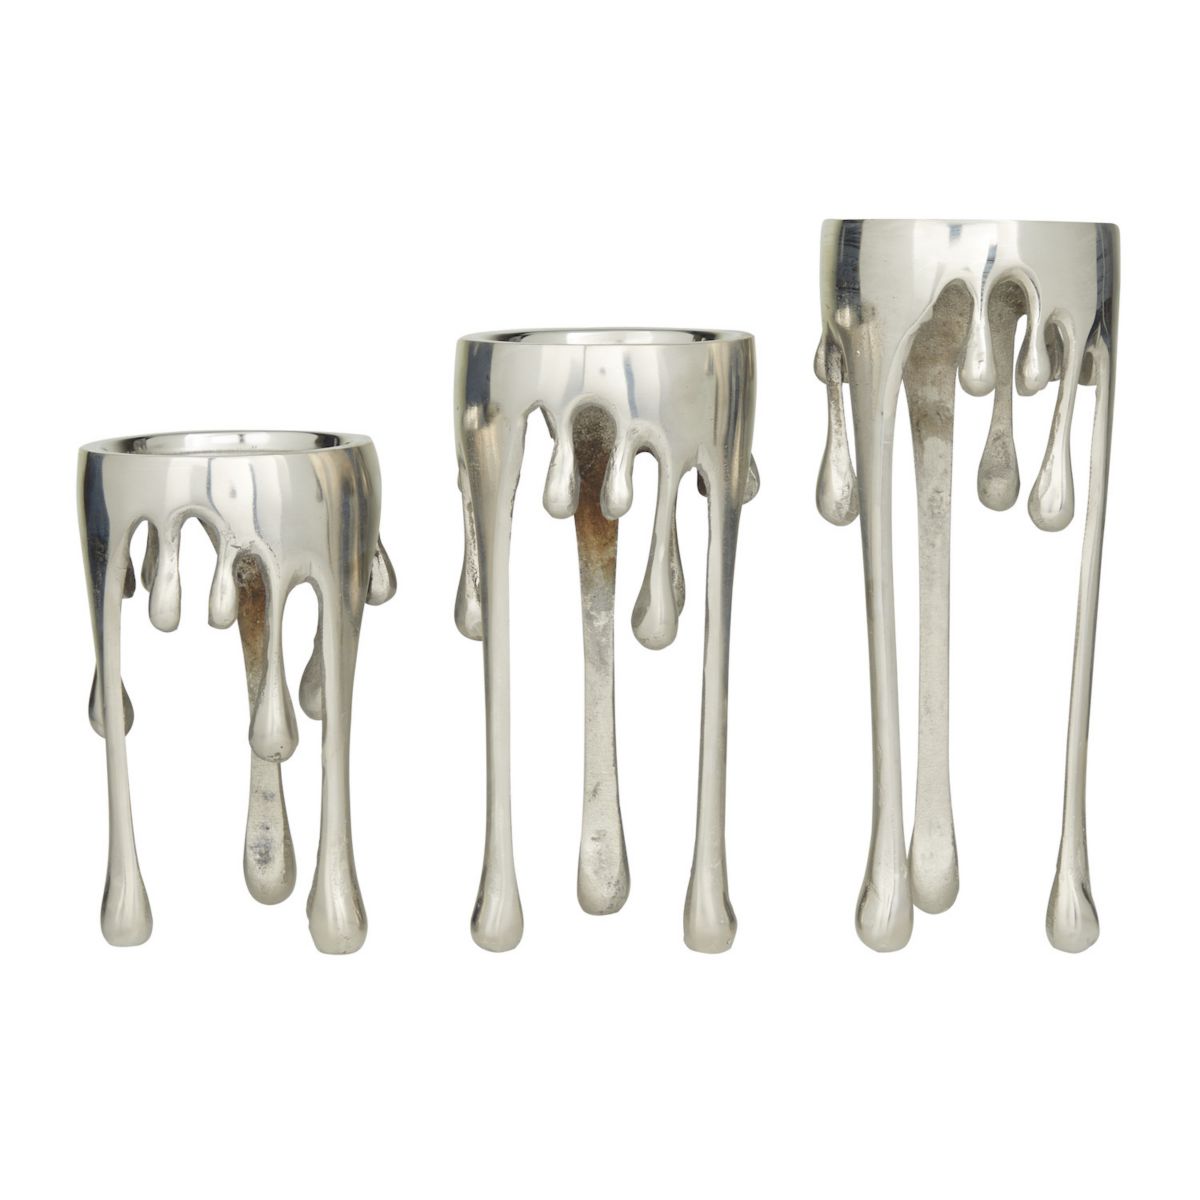 CosmoLiving by Cosmopolitan Dripping Pillar Candle Holder Table Decor 3-piece Set CosmoLiving